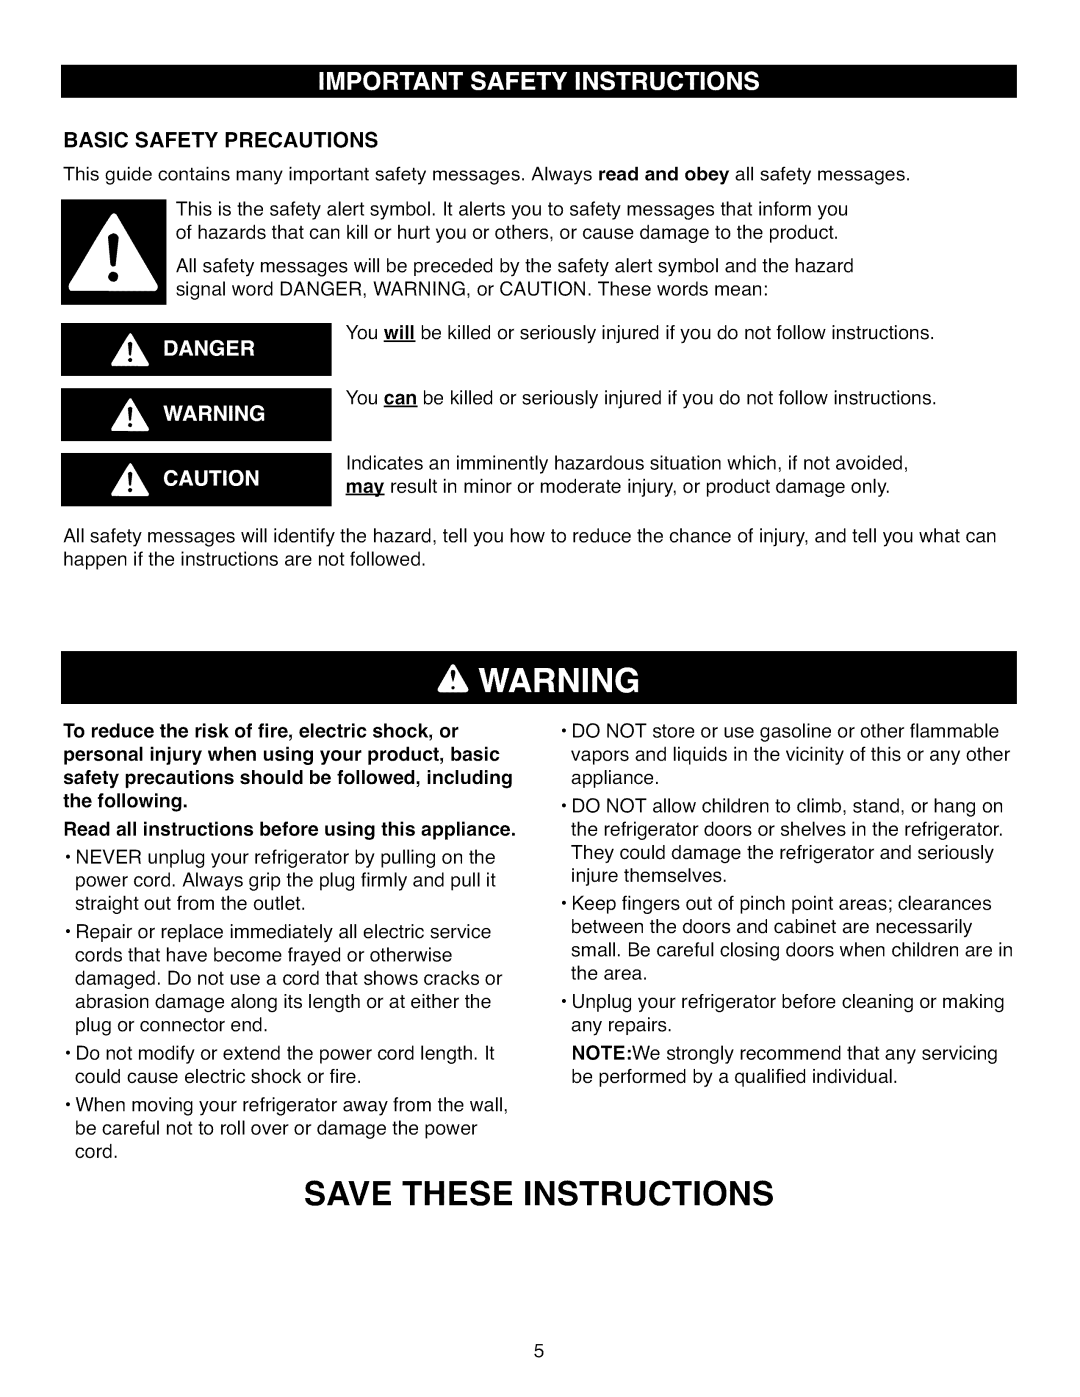 Kenmore 795.7104 manual Save These Instructions 